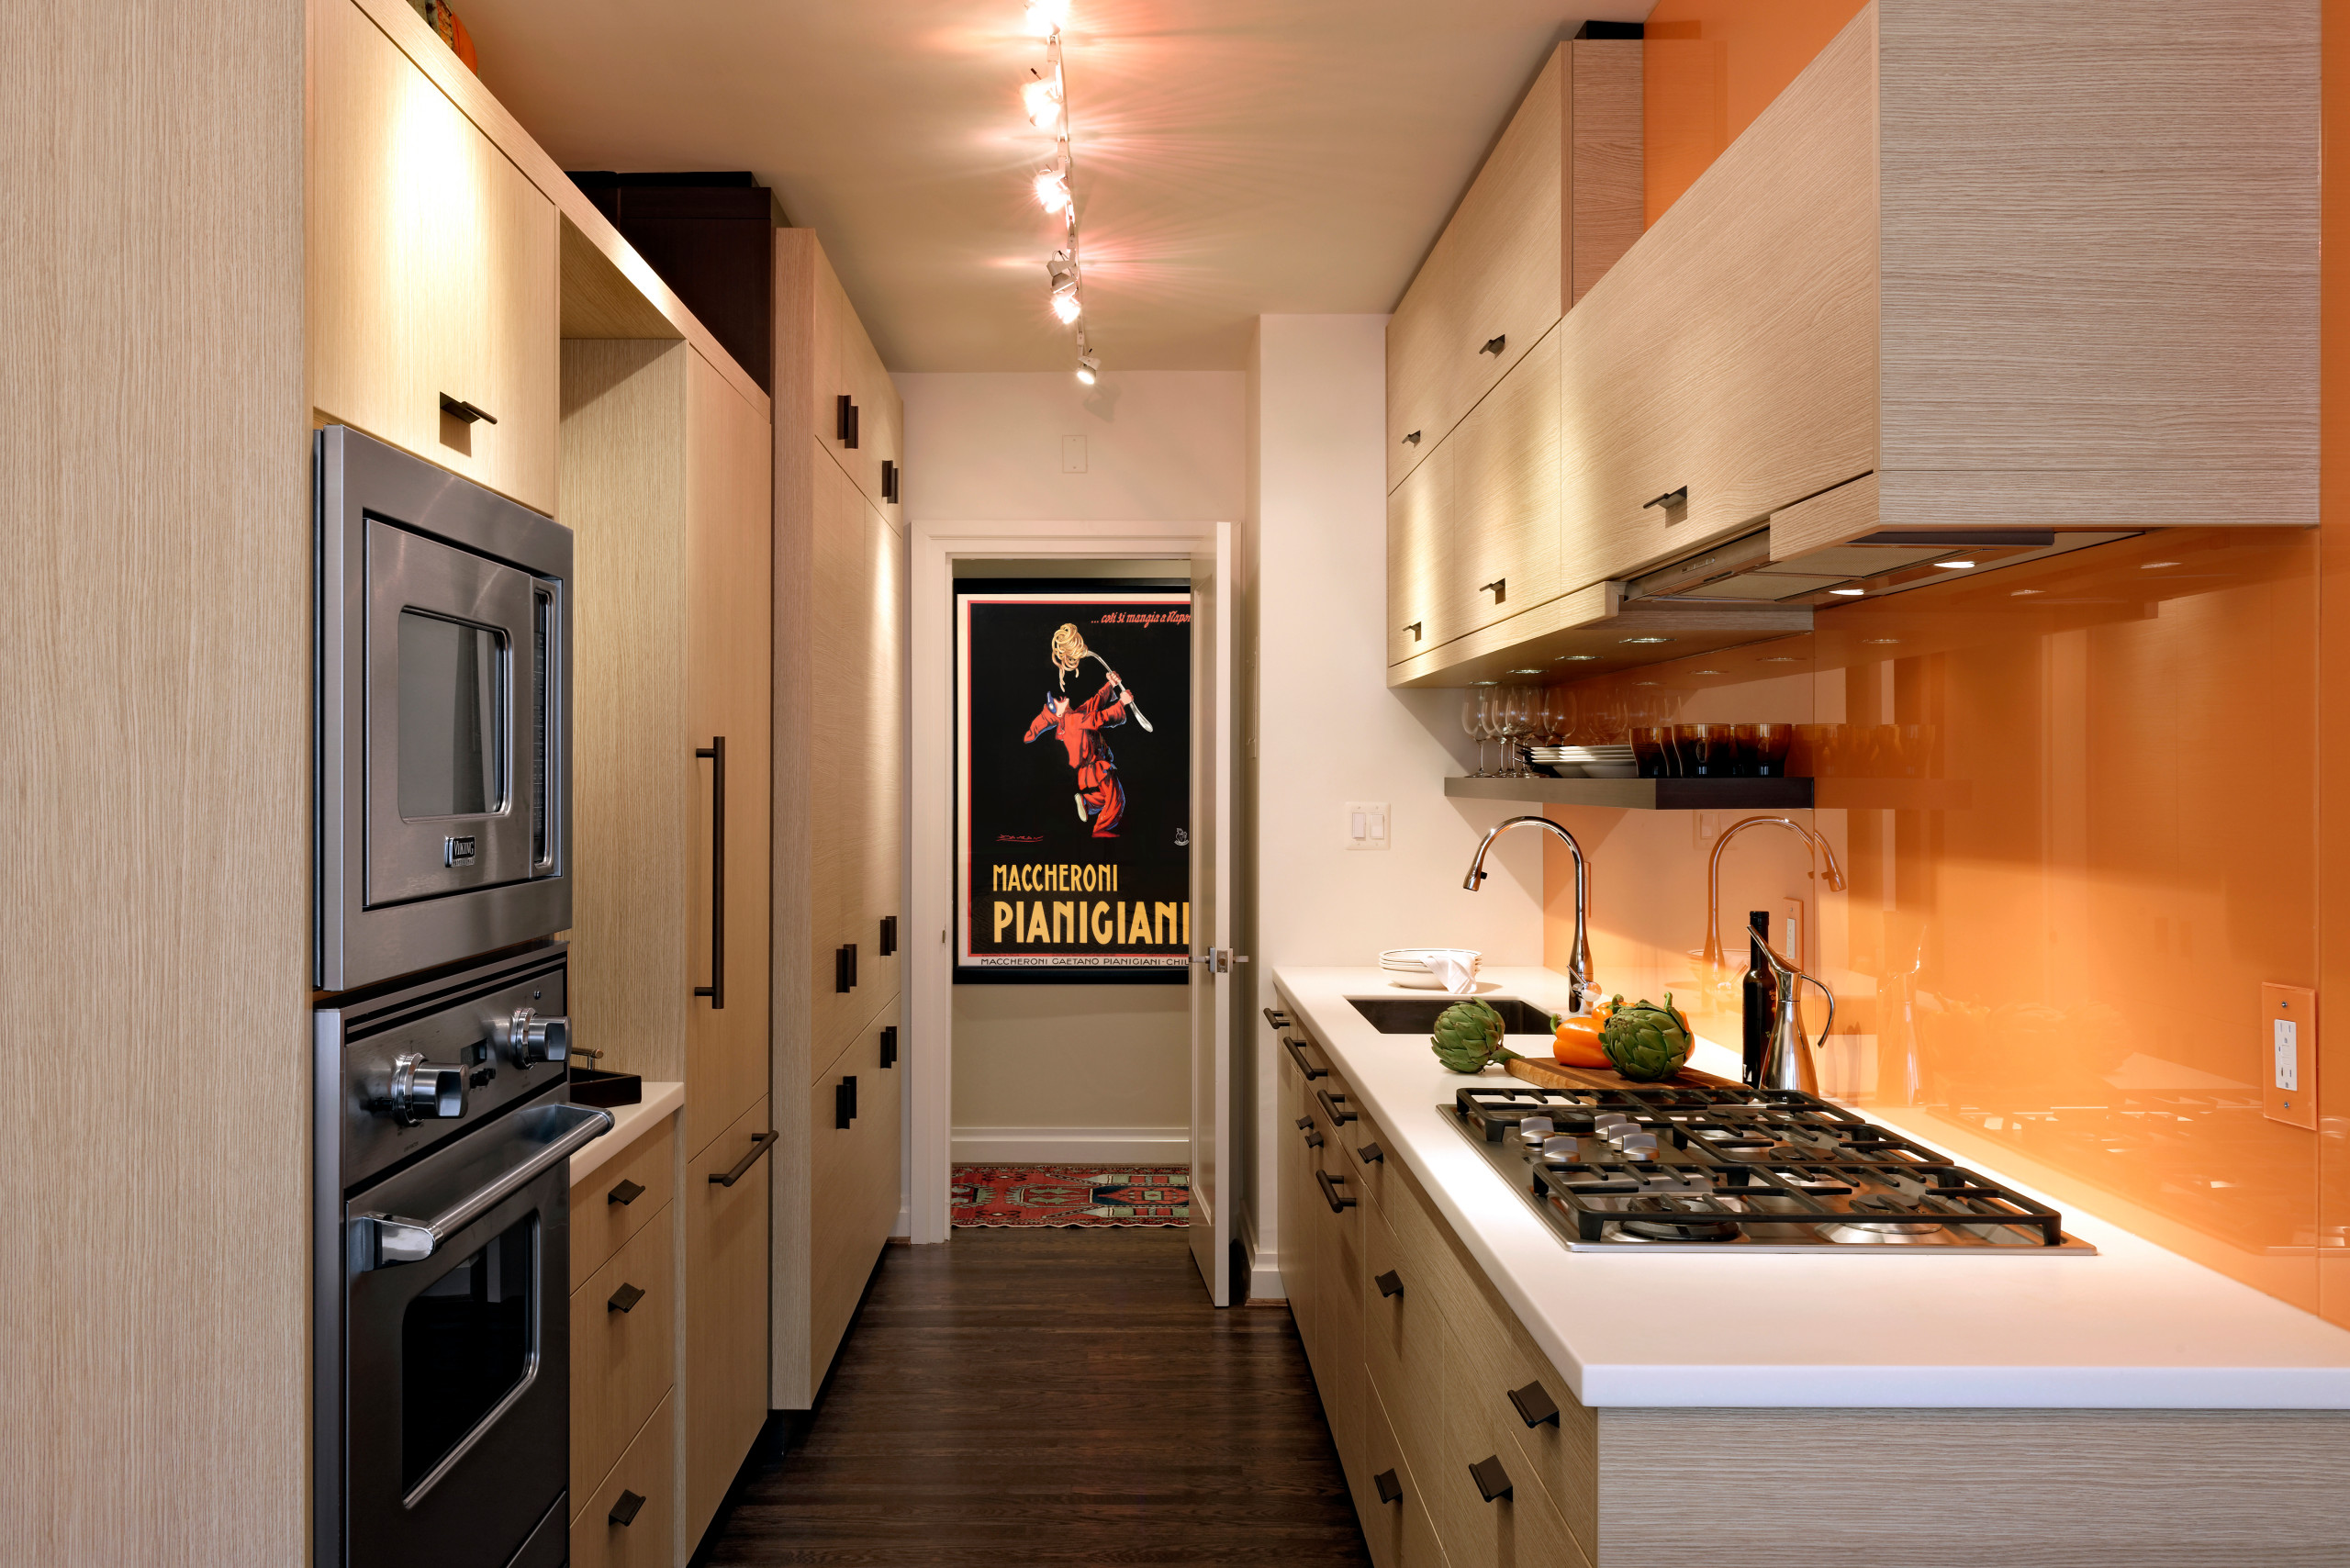 Modern take on a galley kitchen, love the Viking stove.